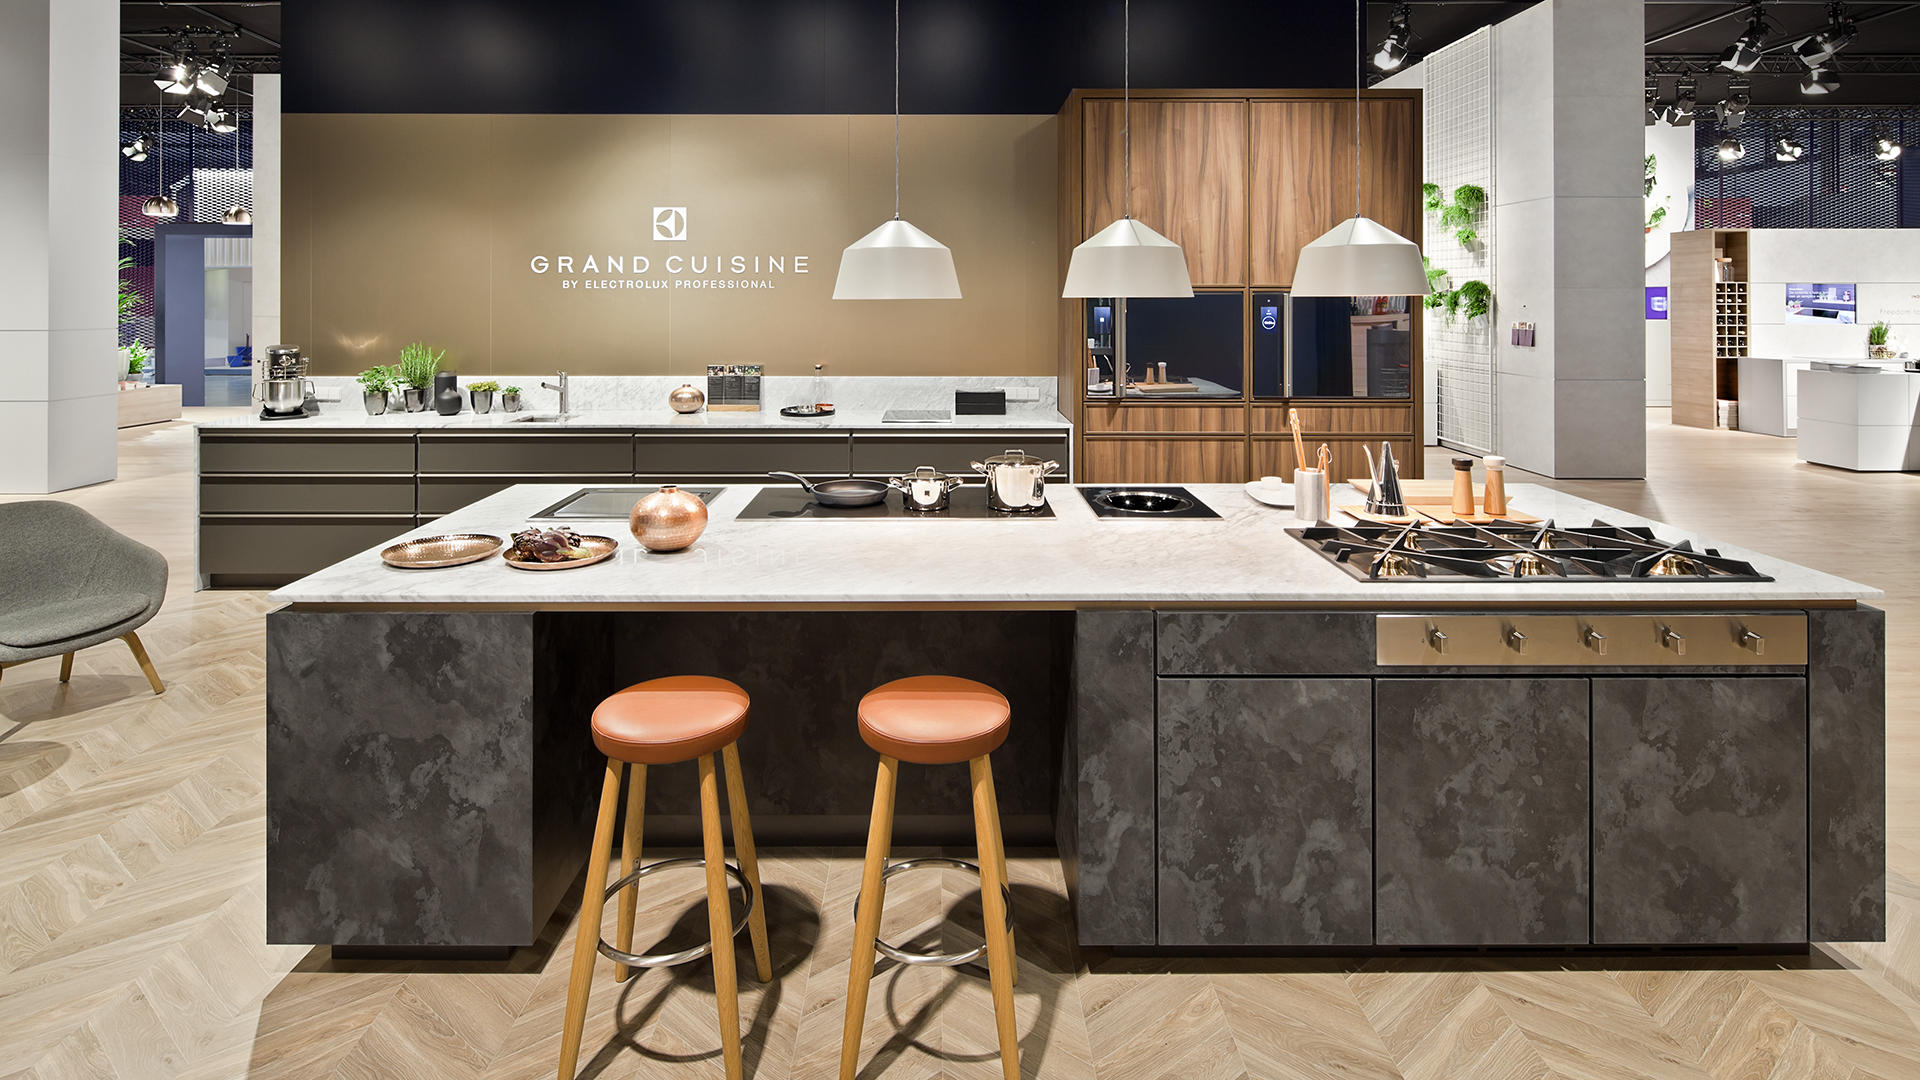 Dart stages the Electrolux fair stand at the EuroCucina 2016